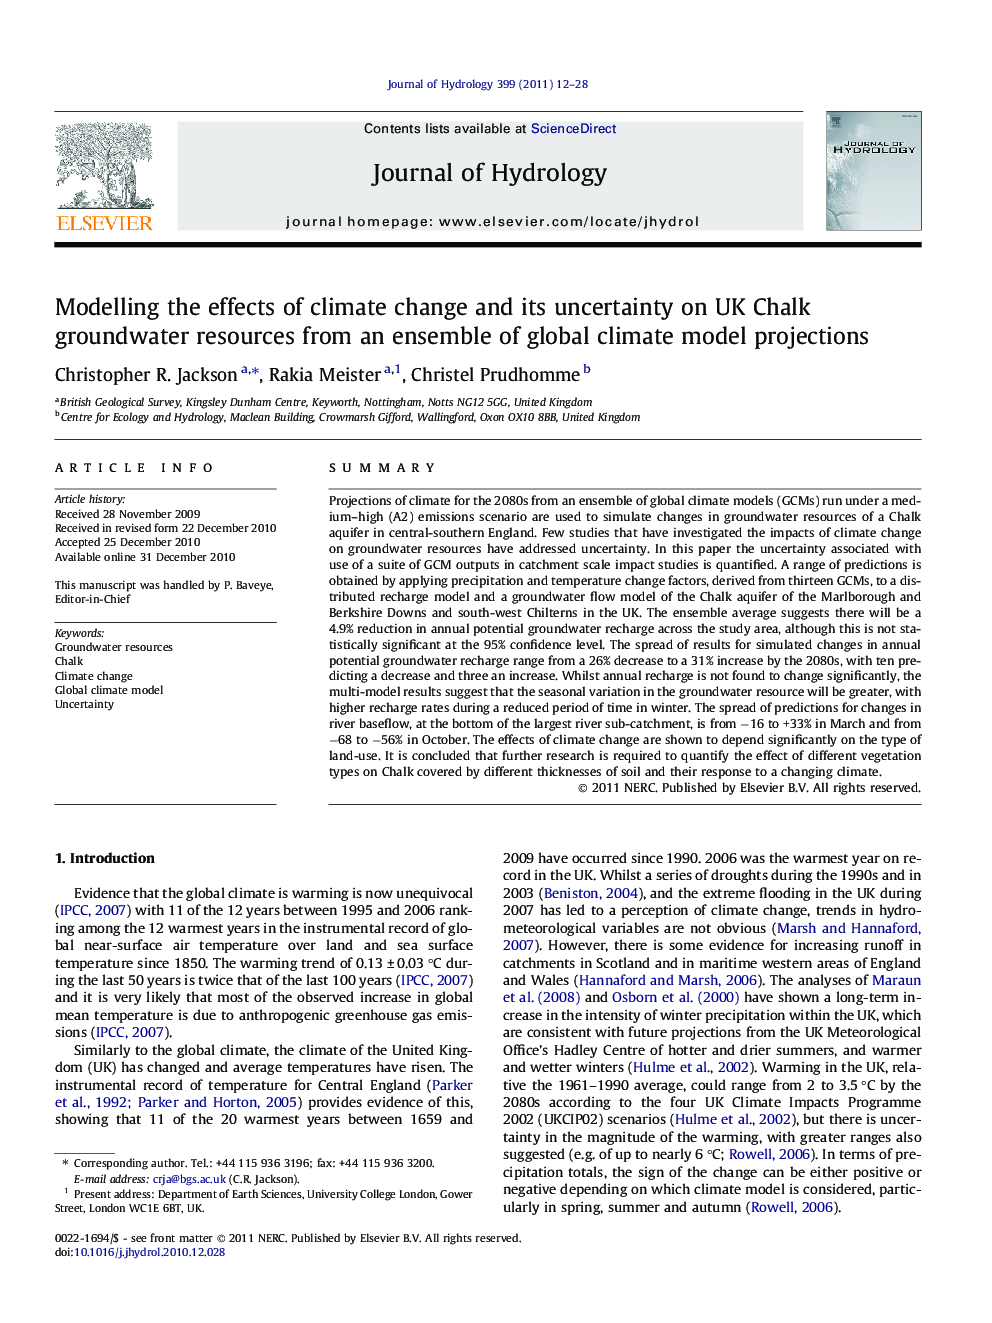 Modelling the effects of climate change and its uncertainty on UK Chalk groundwater resources from an ensemble of global climate model projections